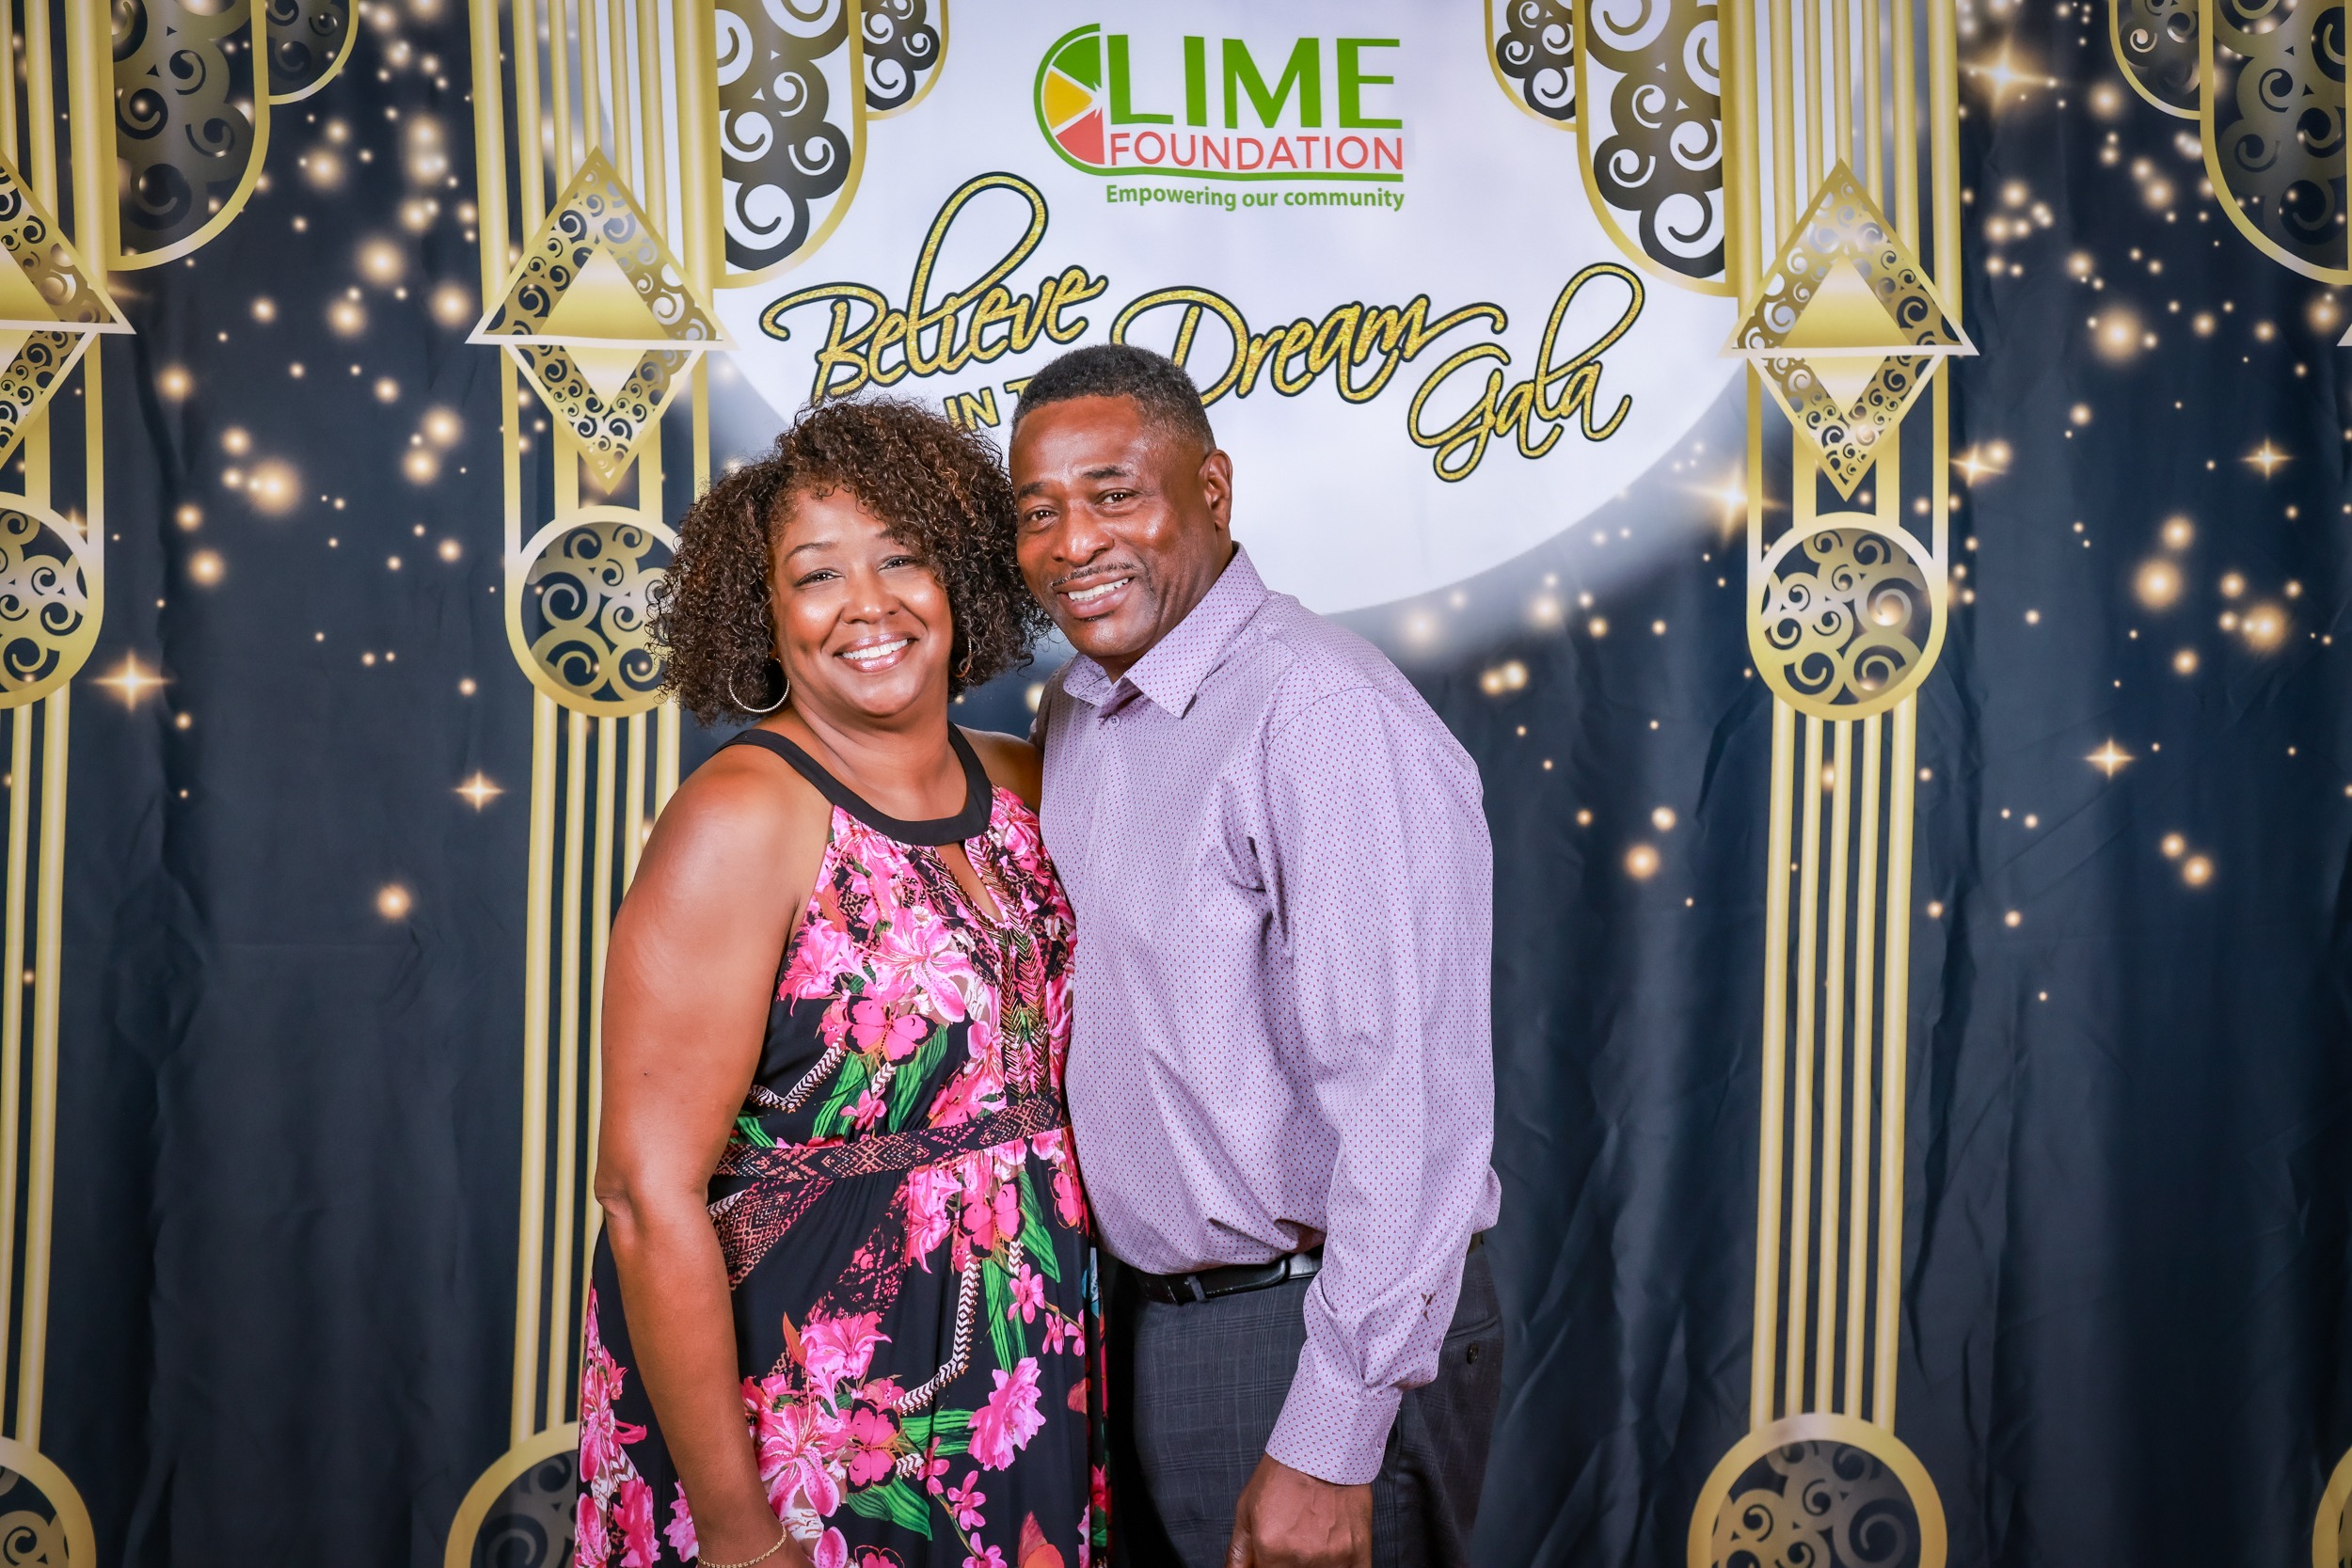 A man and woman posing for a photo in front of a backdrop at The LIME Foundation.